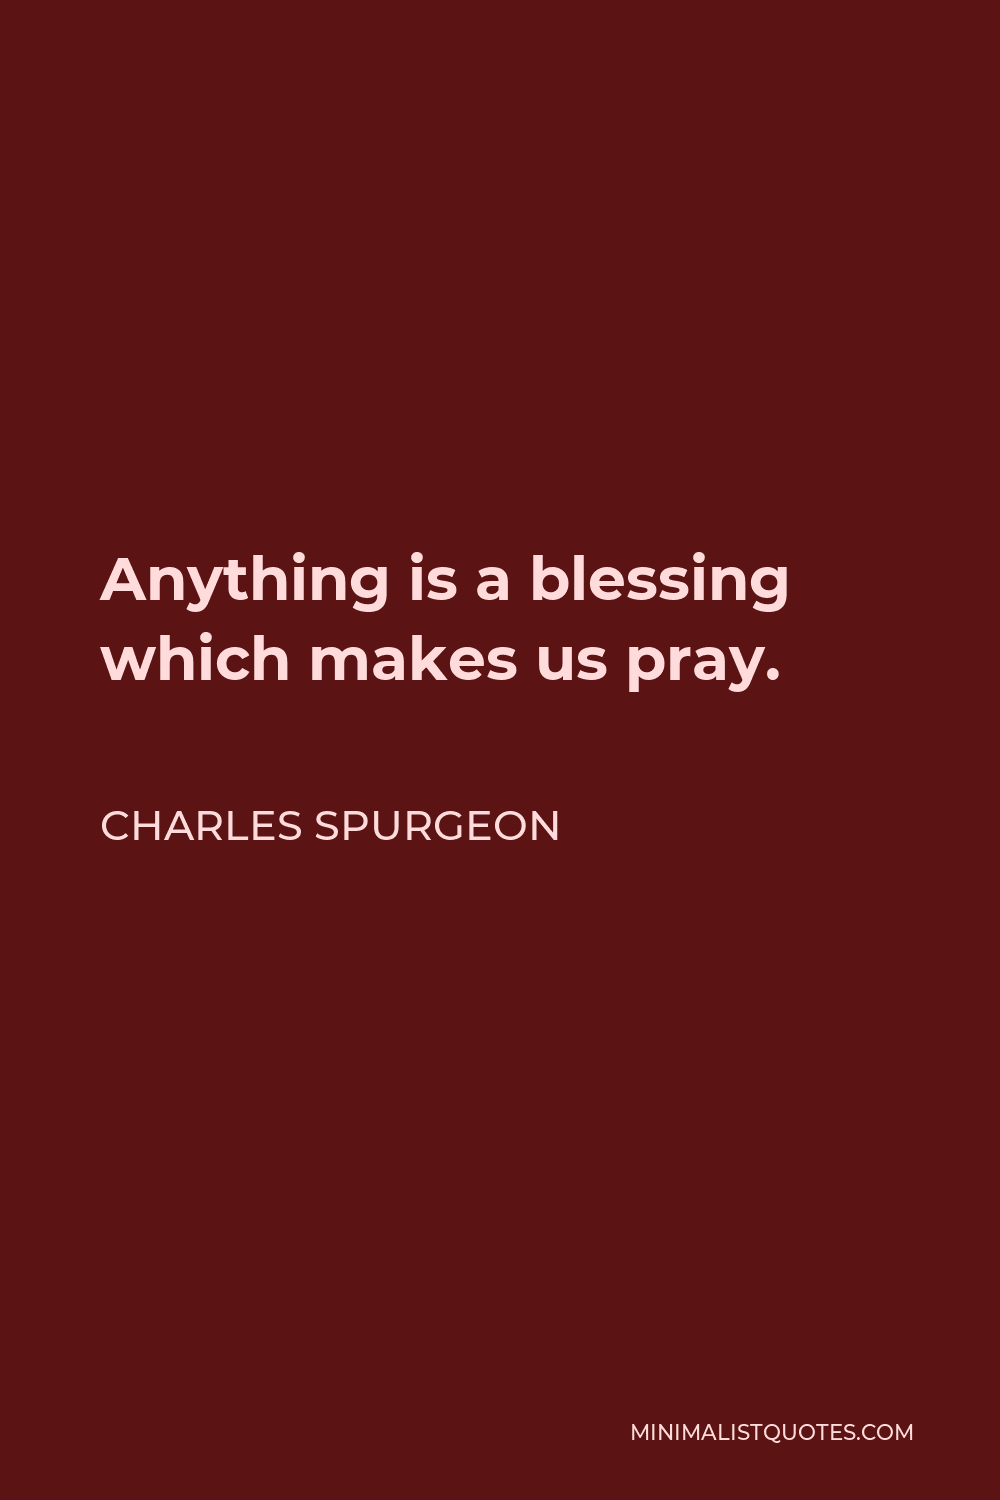 Charles Spurgeon Quote - Anything is a blessing which makes us pray.